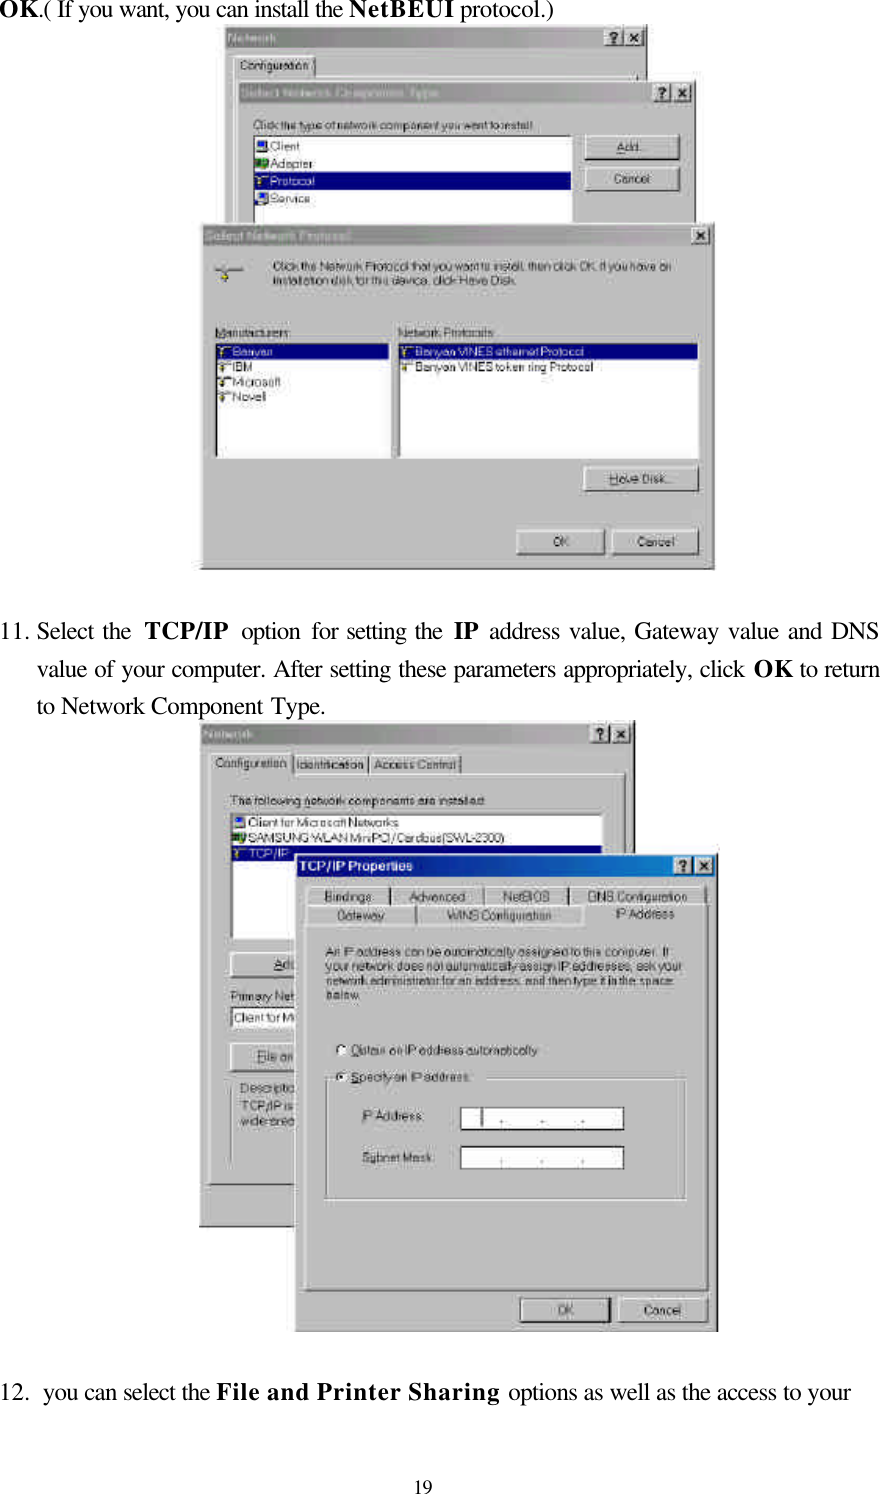  19OK.( If you want, you can install the NetBEUI protocol.)   11. Select the  TCP/IP option for setting the IP address value, Gateway value and DNS value of your computer. After setting these parameters appropriately, click OK to return to Network Component Type.   12.  you can select the File and Printer Sharing options as well as the access to your   